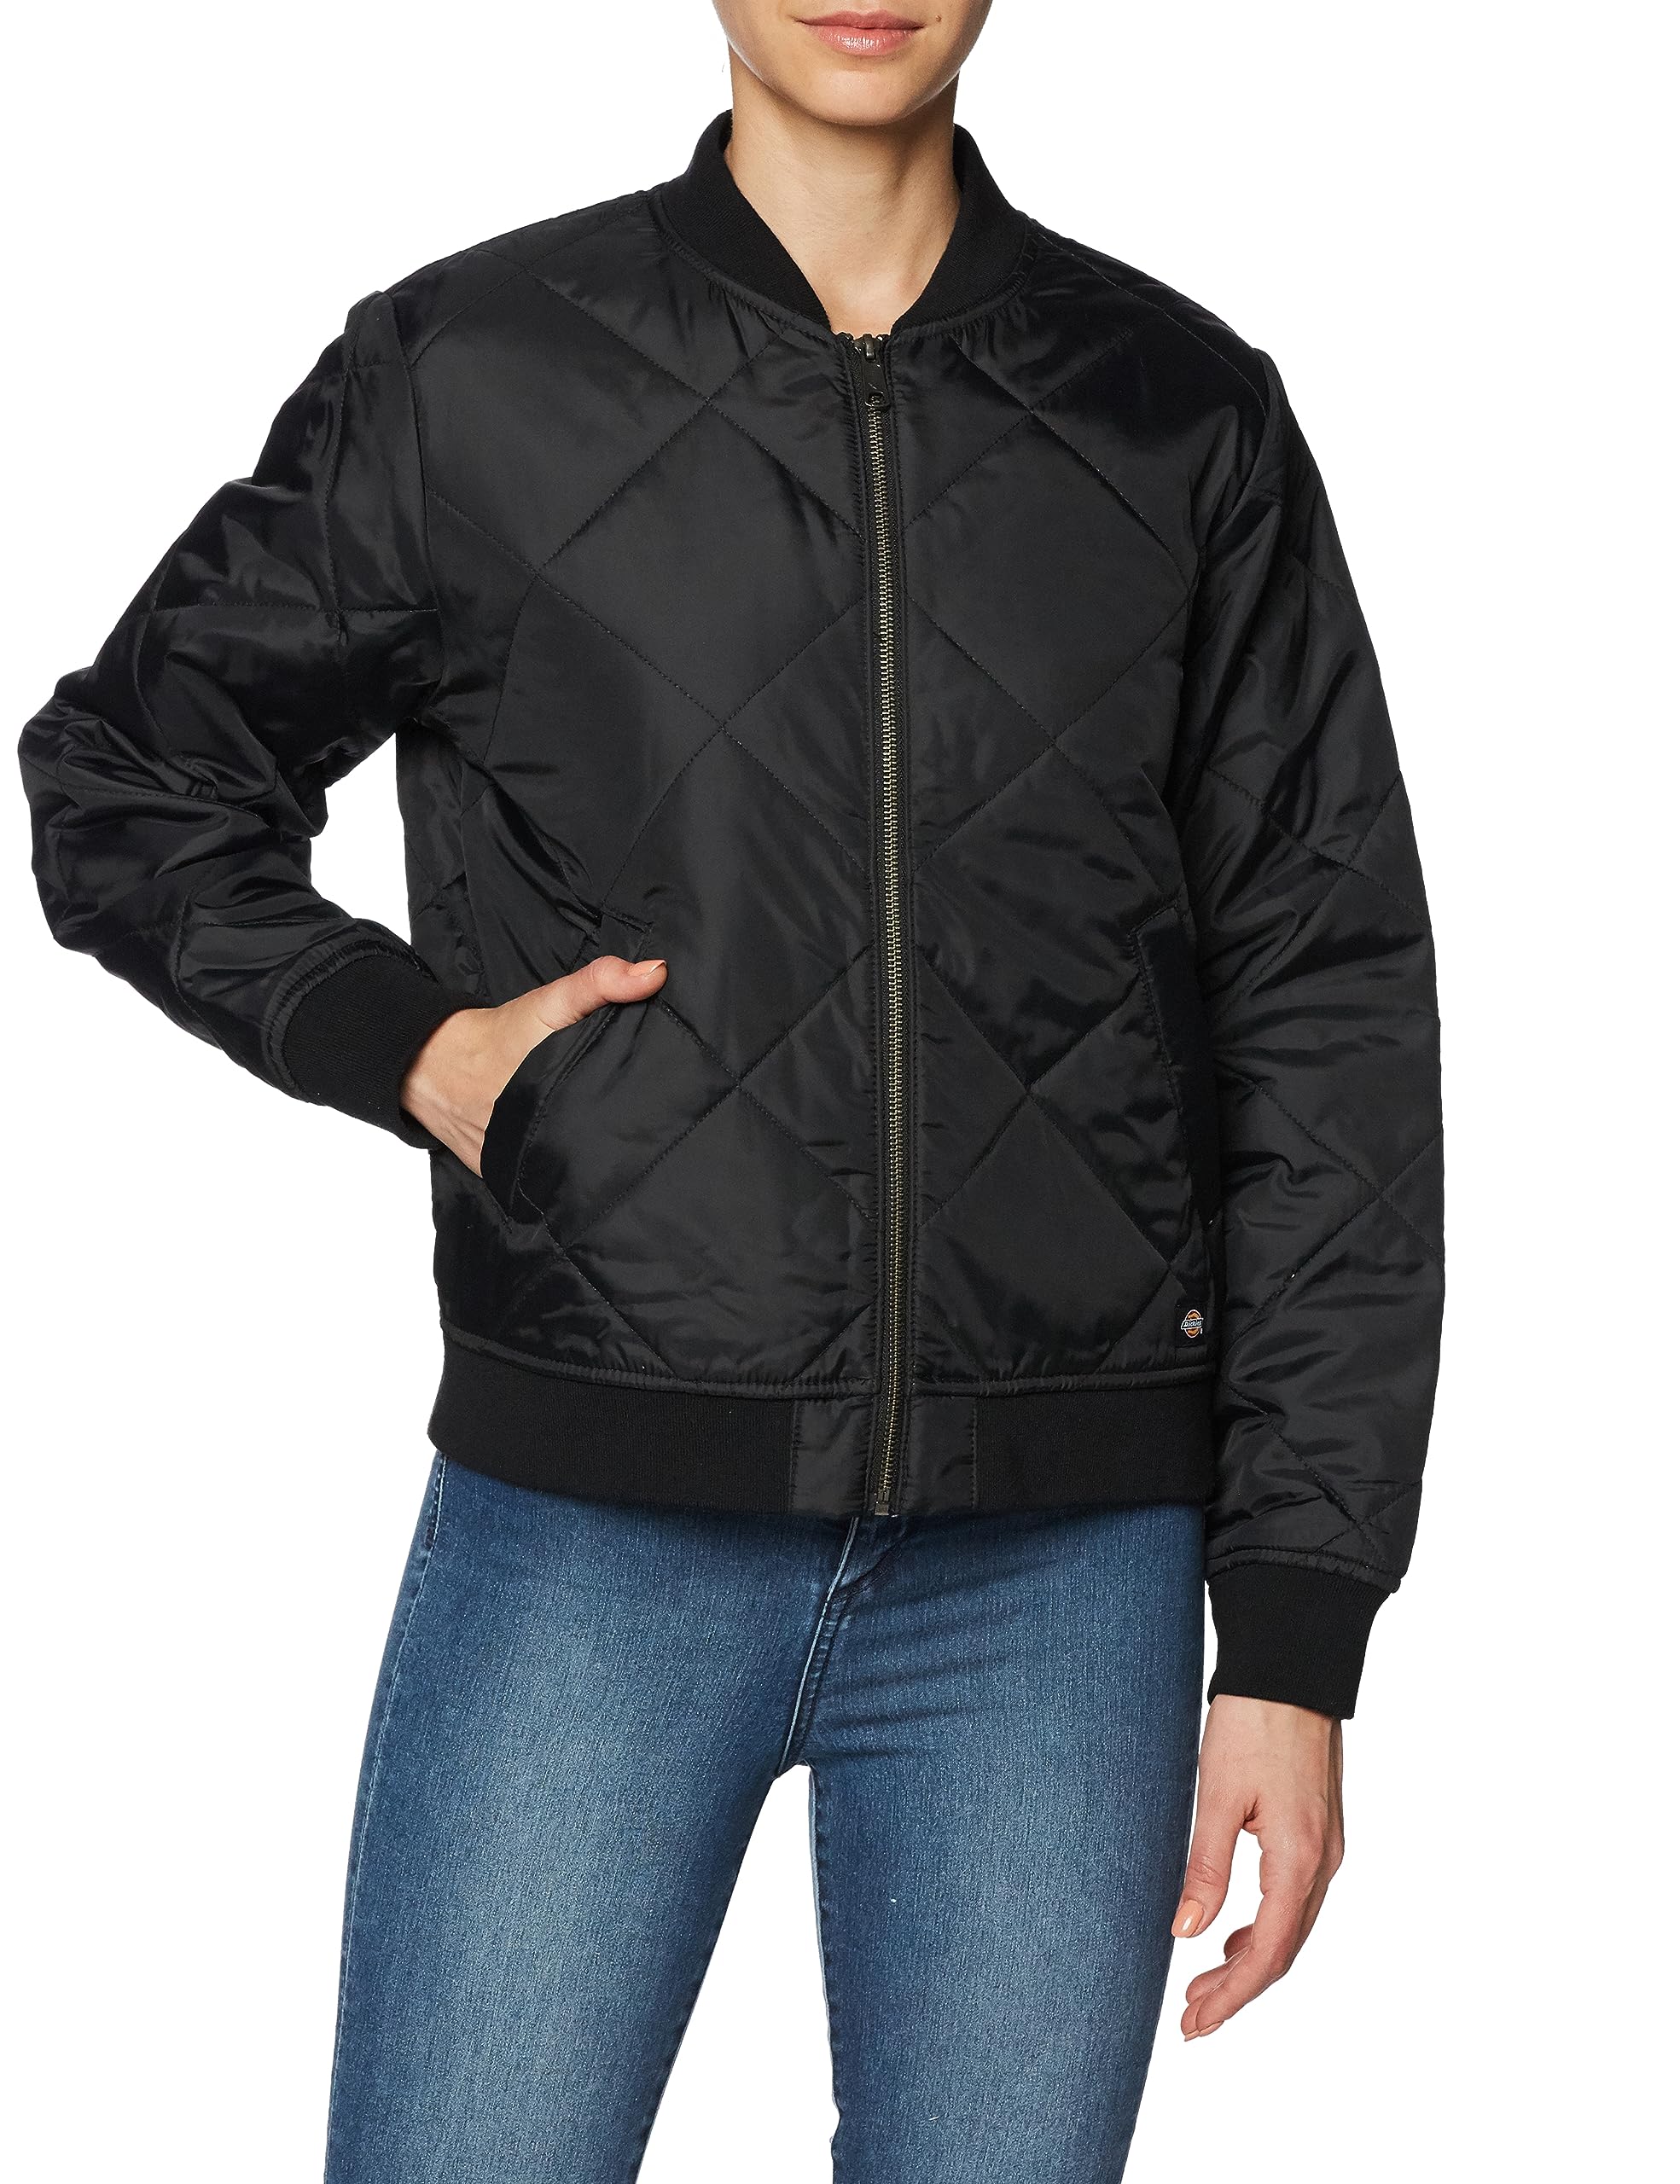 Dickies Women Quilted Bomber Jacket, Black, Large